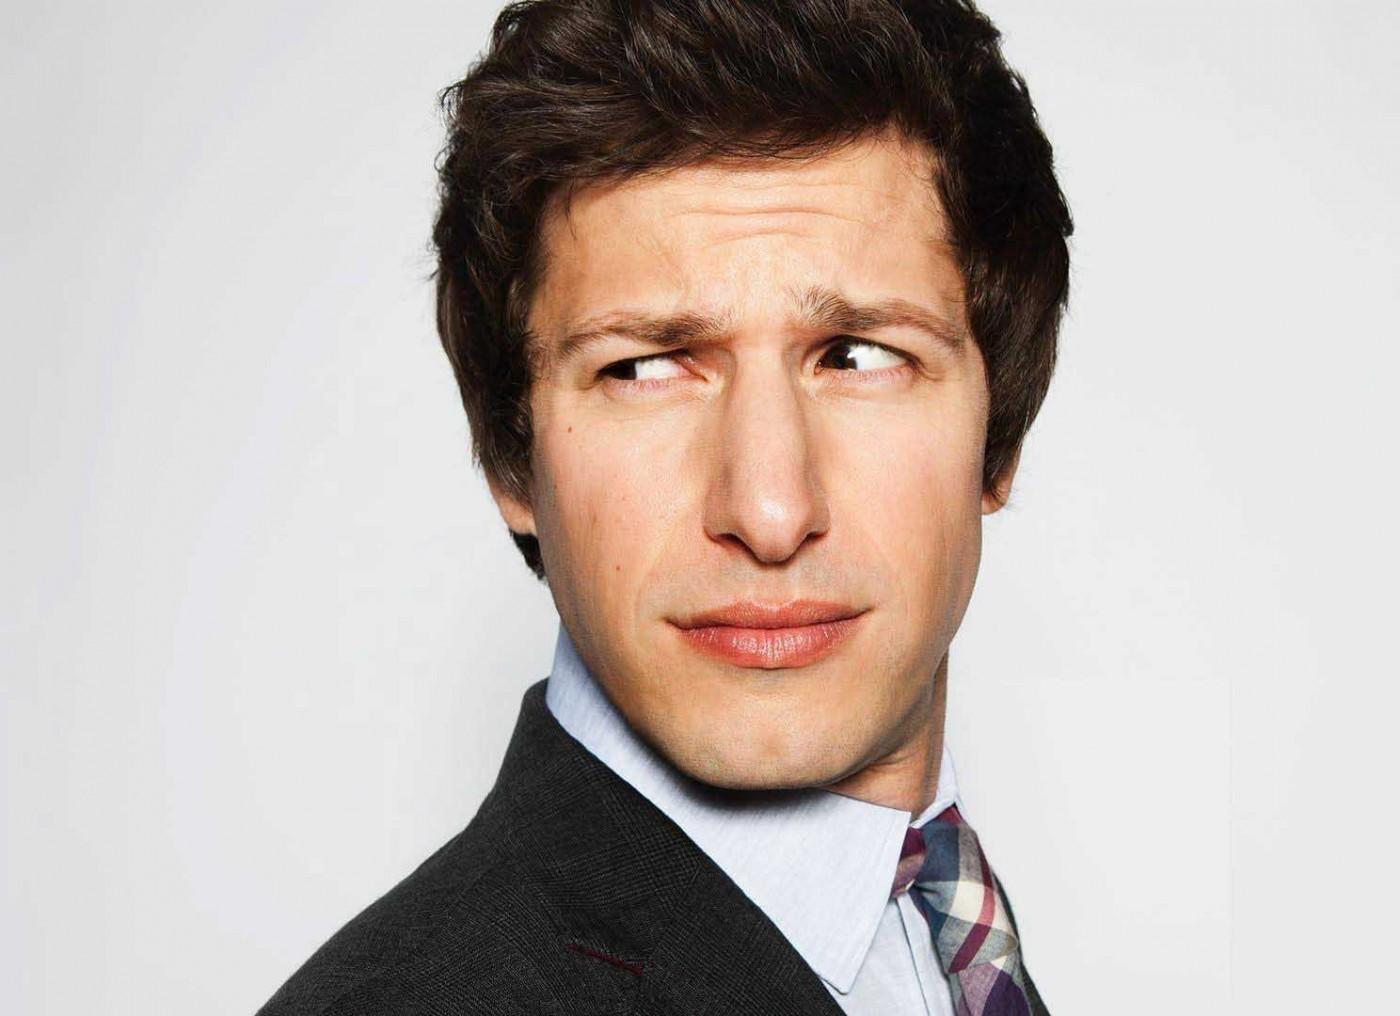 Download 1400x1016 Andy Samberg, Actor, Looking Away, Suit, Face